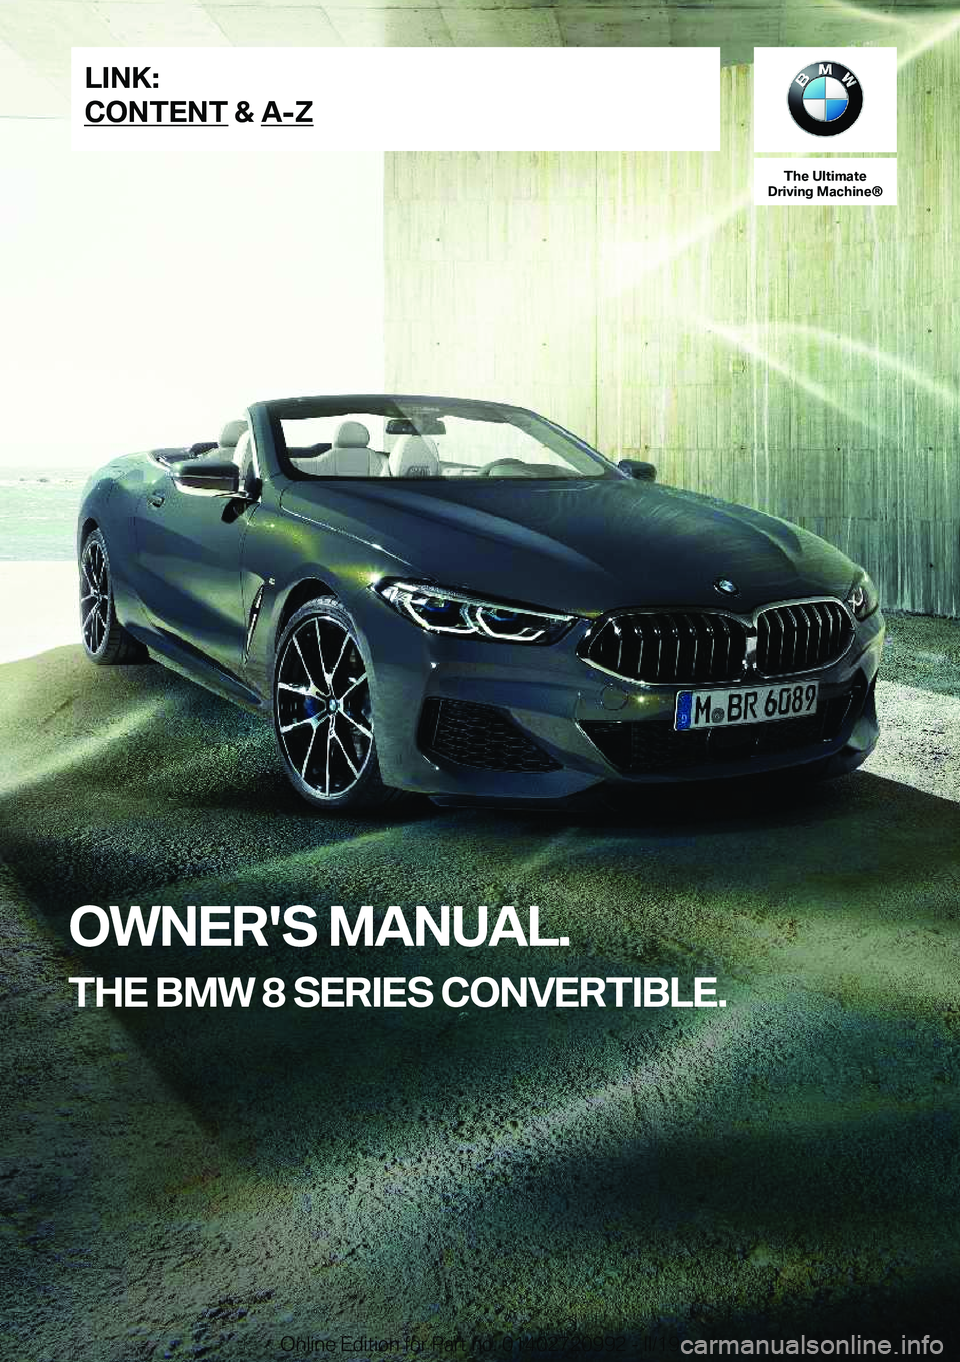 BMW 8 SERIES CONVERTIBLE 2019  Owners Manual �T�h�e��U�l�t�i�m�a�t�e
�D�r�i�v�i�n�g��M�a�c�h�i�n�e�n
�O�W�N�E�R�'�S��M�A�N�U�A�L�.
�T�H�E��B�M�W��8��S�E�R�I�E�S��C�O�N�V�E�R�T�I�B�L�E�.�L�I�N�K�:
�C�O�N�T�E�N�T��&��A�-�Z�O�n�l�i�n�e